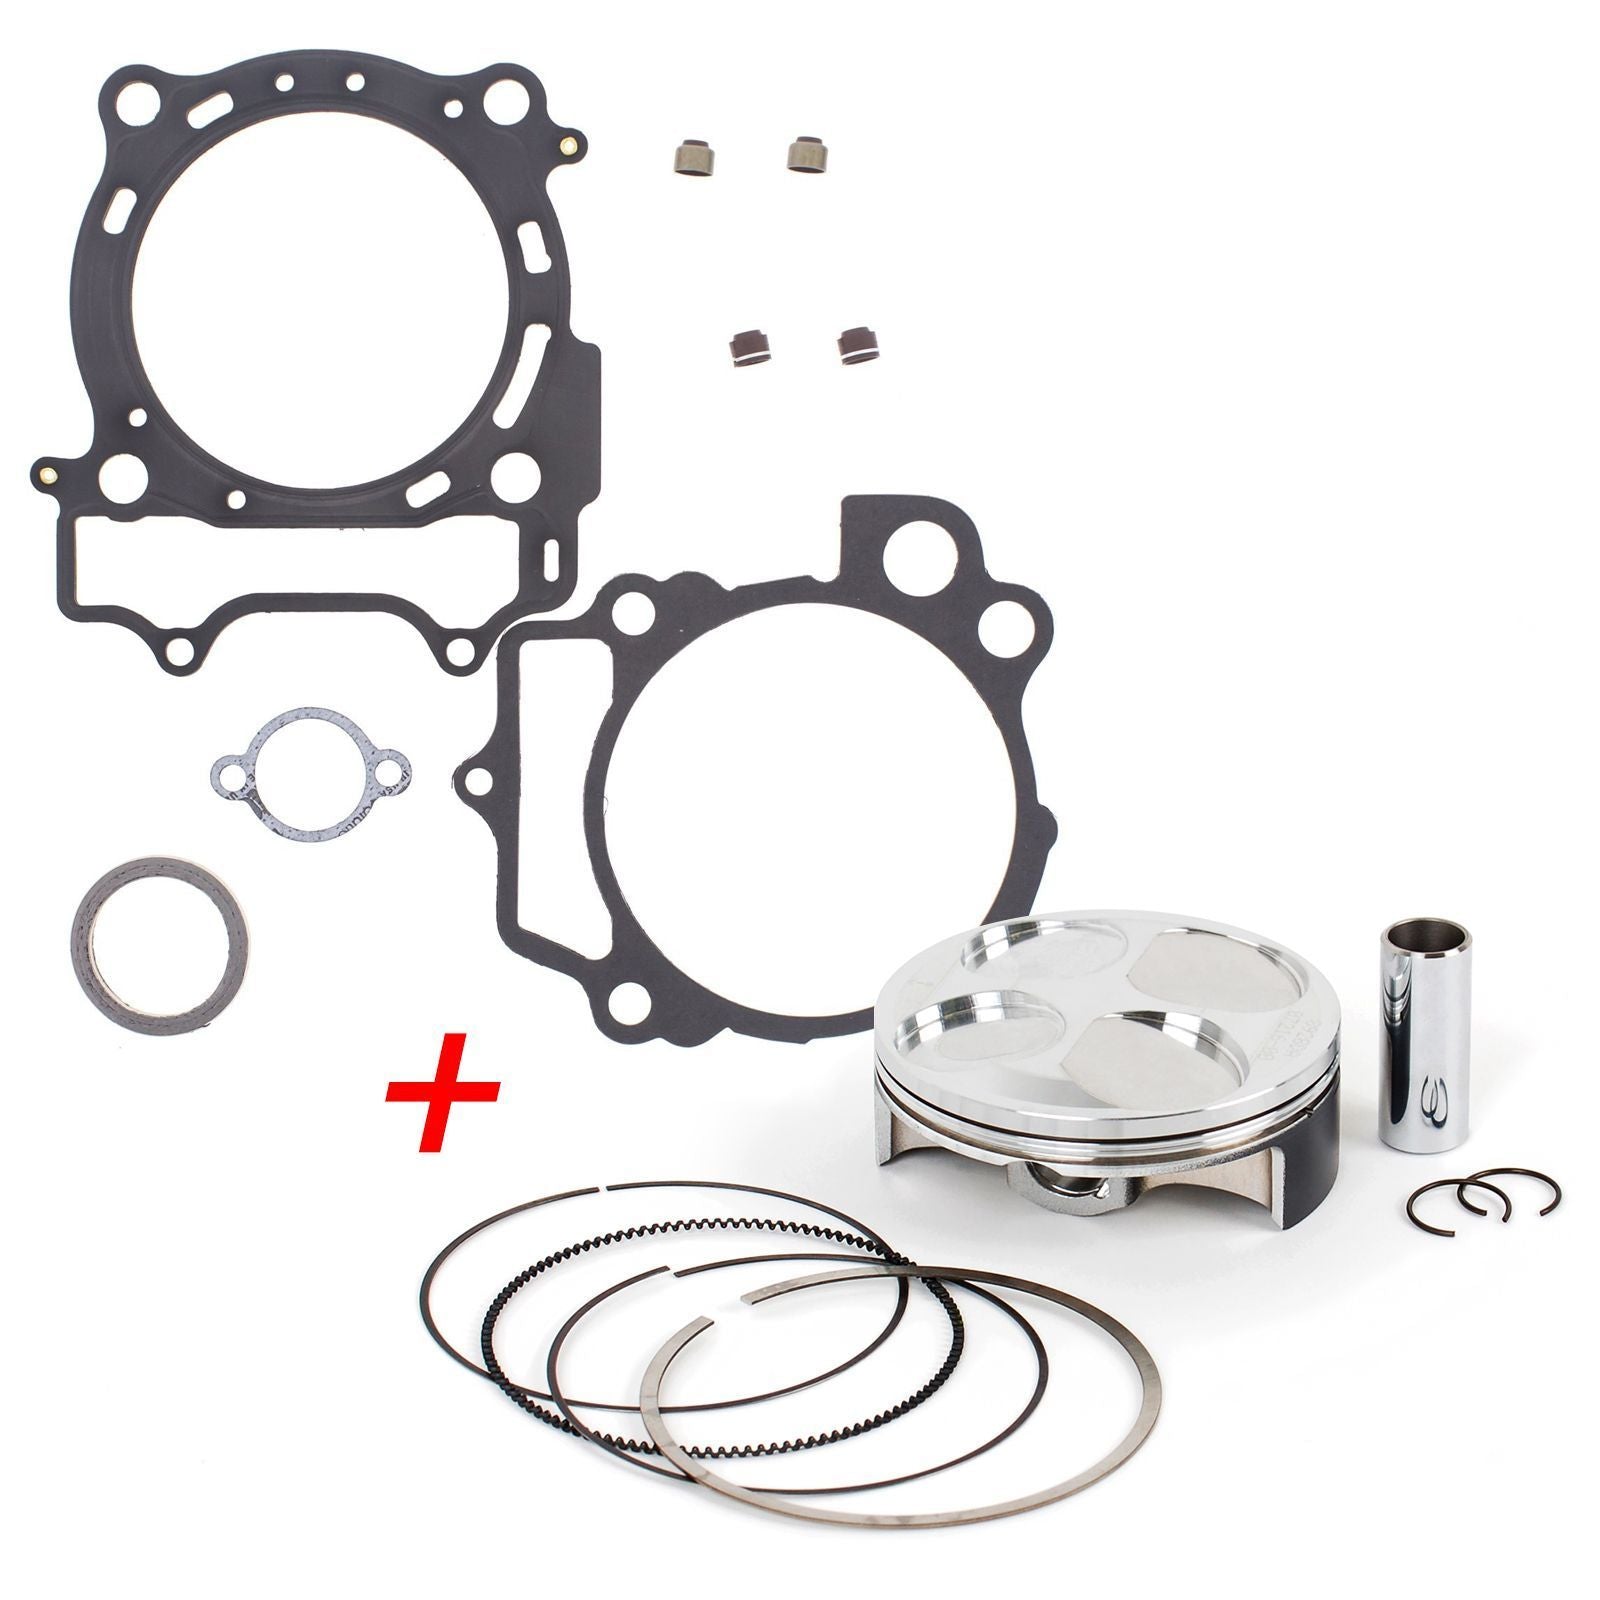 New Top End Rebuild Kit (B PRO) For Yamaha WR250F 2001-2013 #ERTY030BP